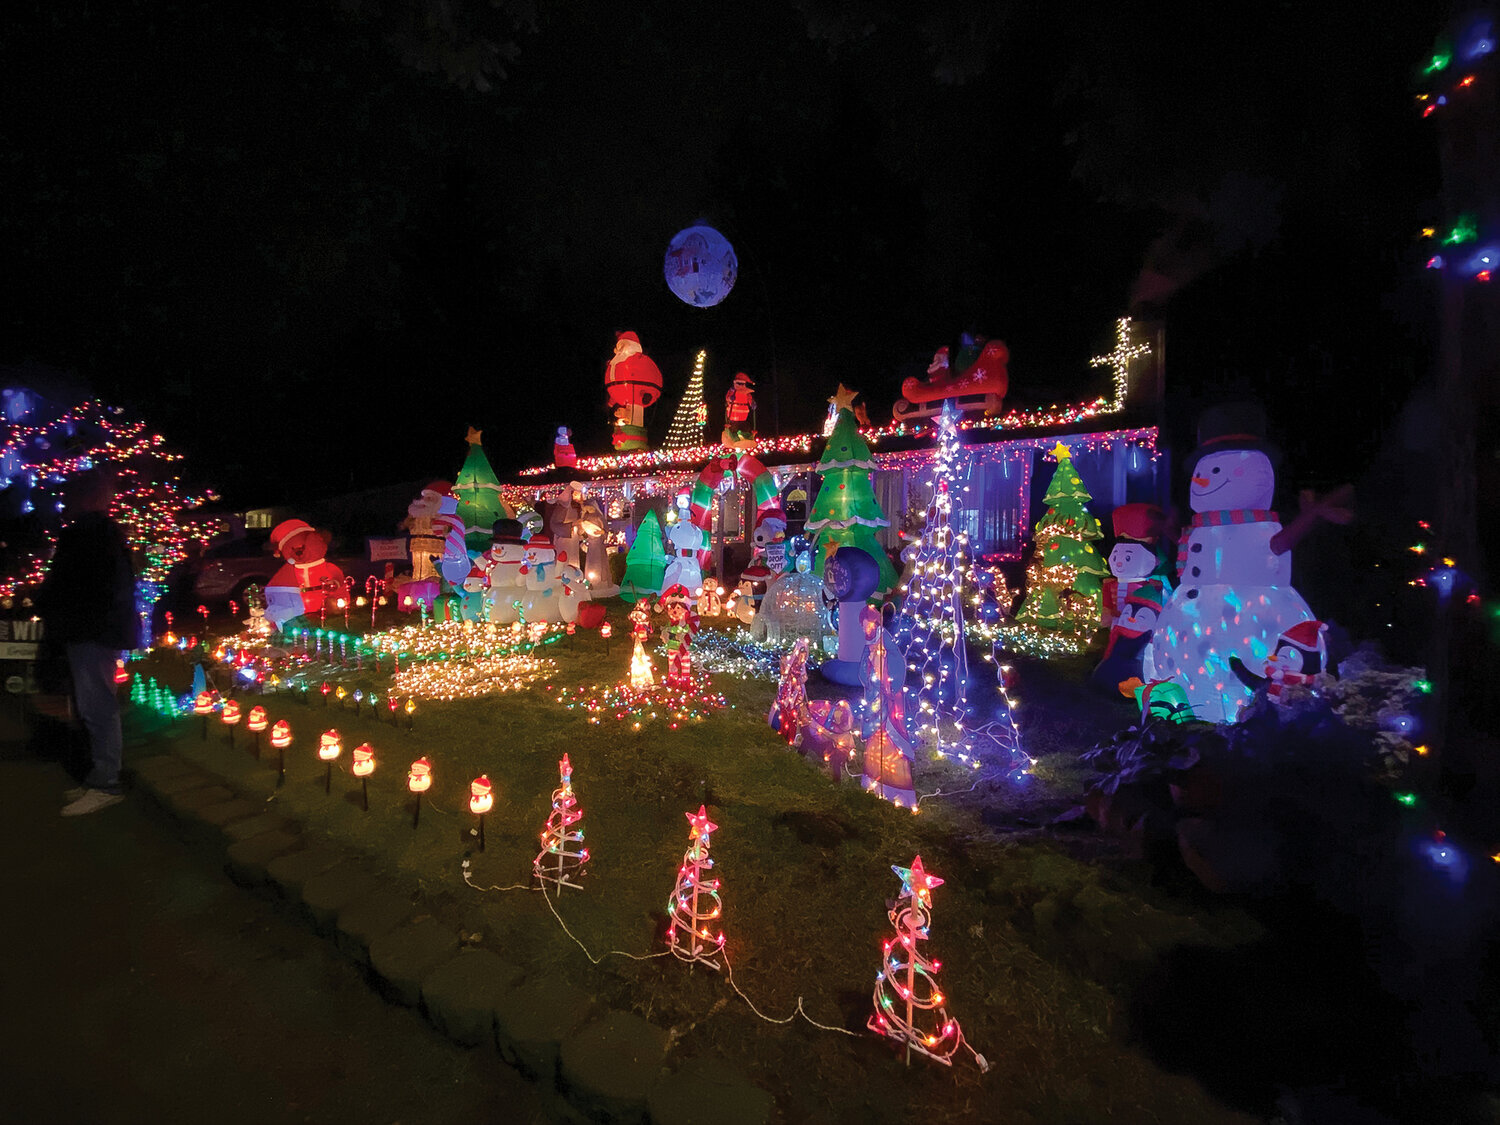 This photo shows the Battle Ground Tour of Lights 2022 Griswold Award winner. See the Tour of Lights map and vote for your favorite entries beginning this week by visiting cityofbg.org/934/Battle-of-Lights---Holiday-Decorating-Co.